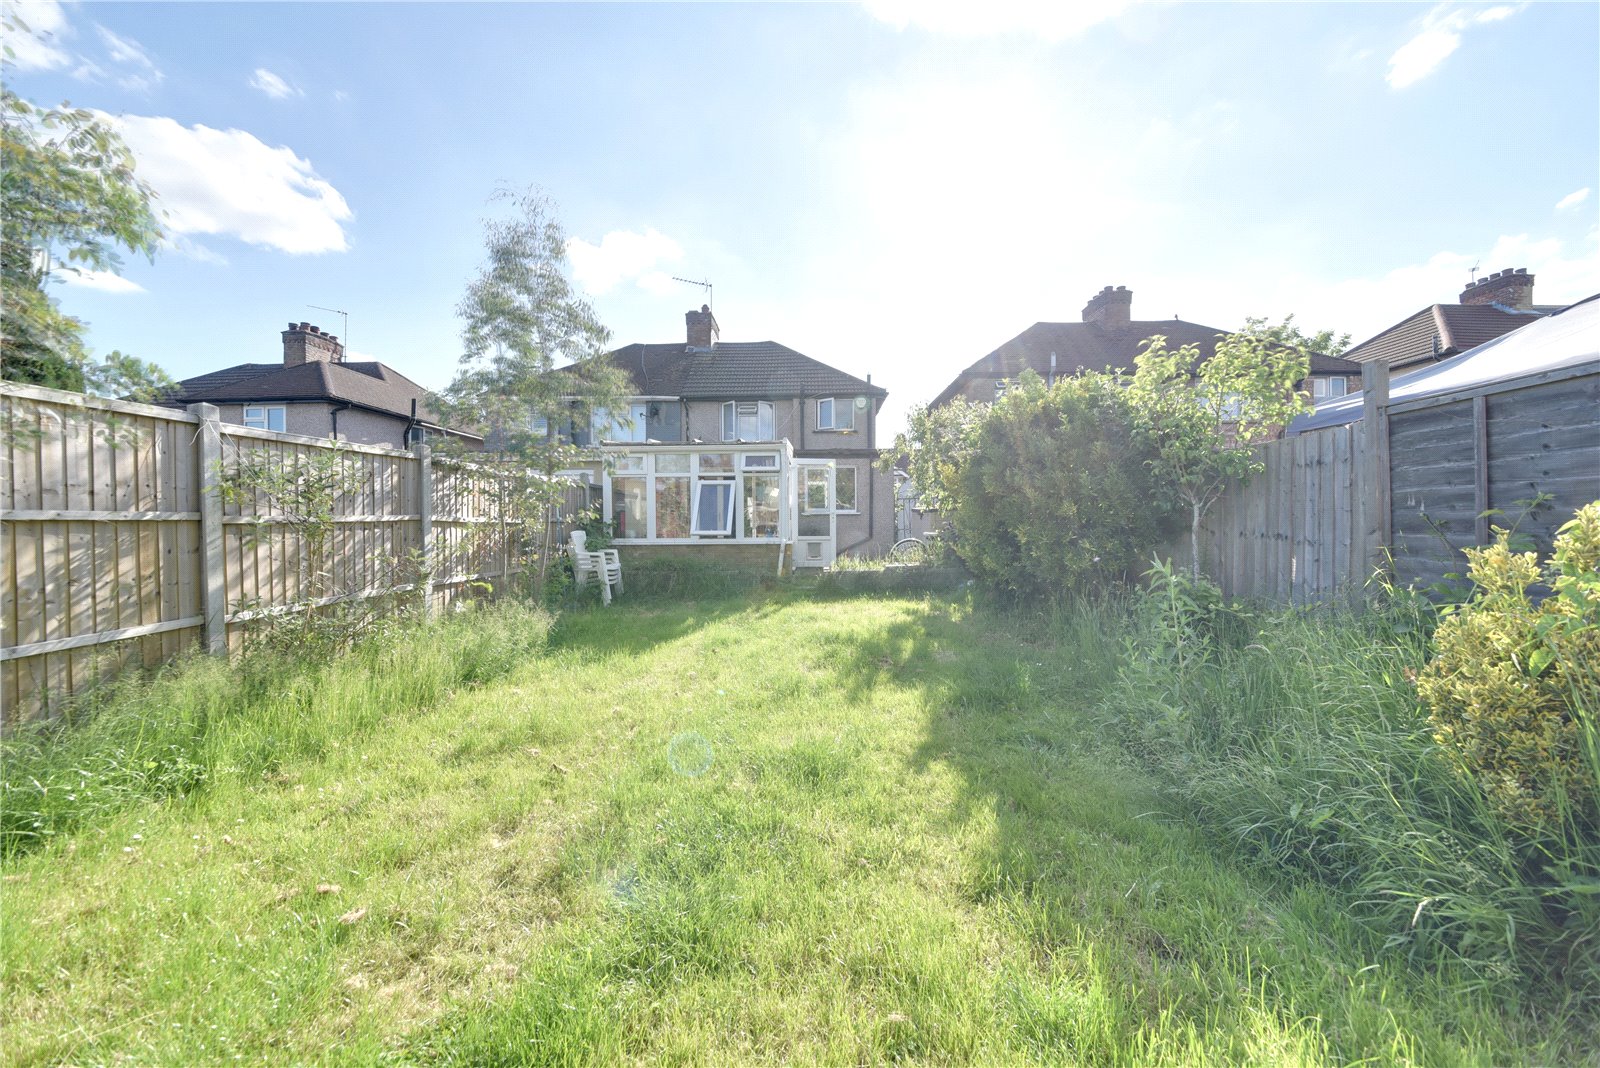 3 bed house for sale in Windsor Road, Harrow  - Property Image 5